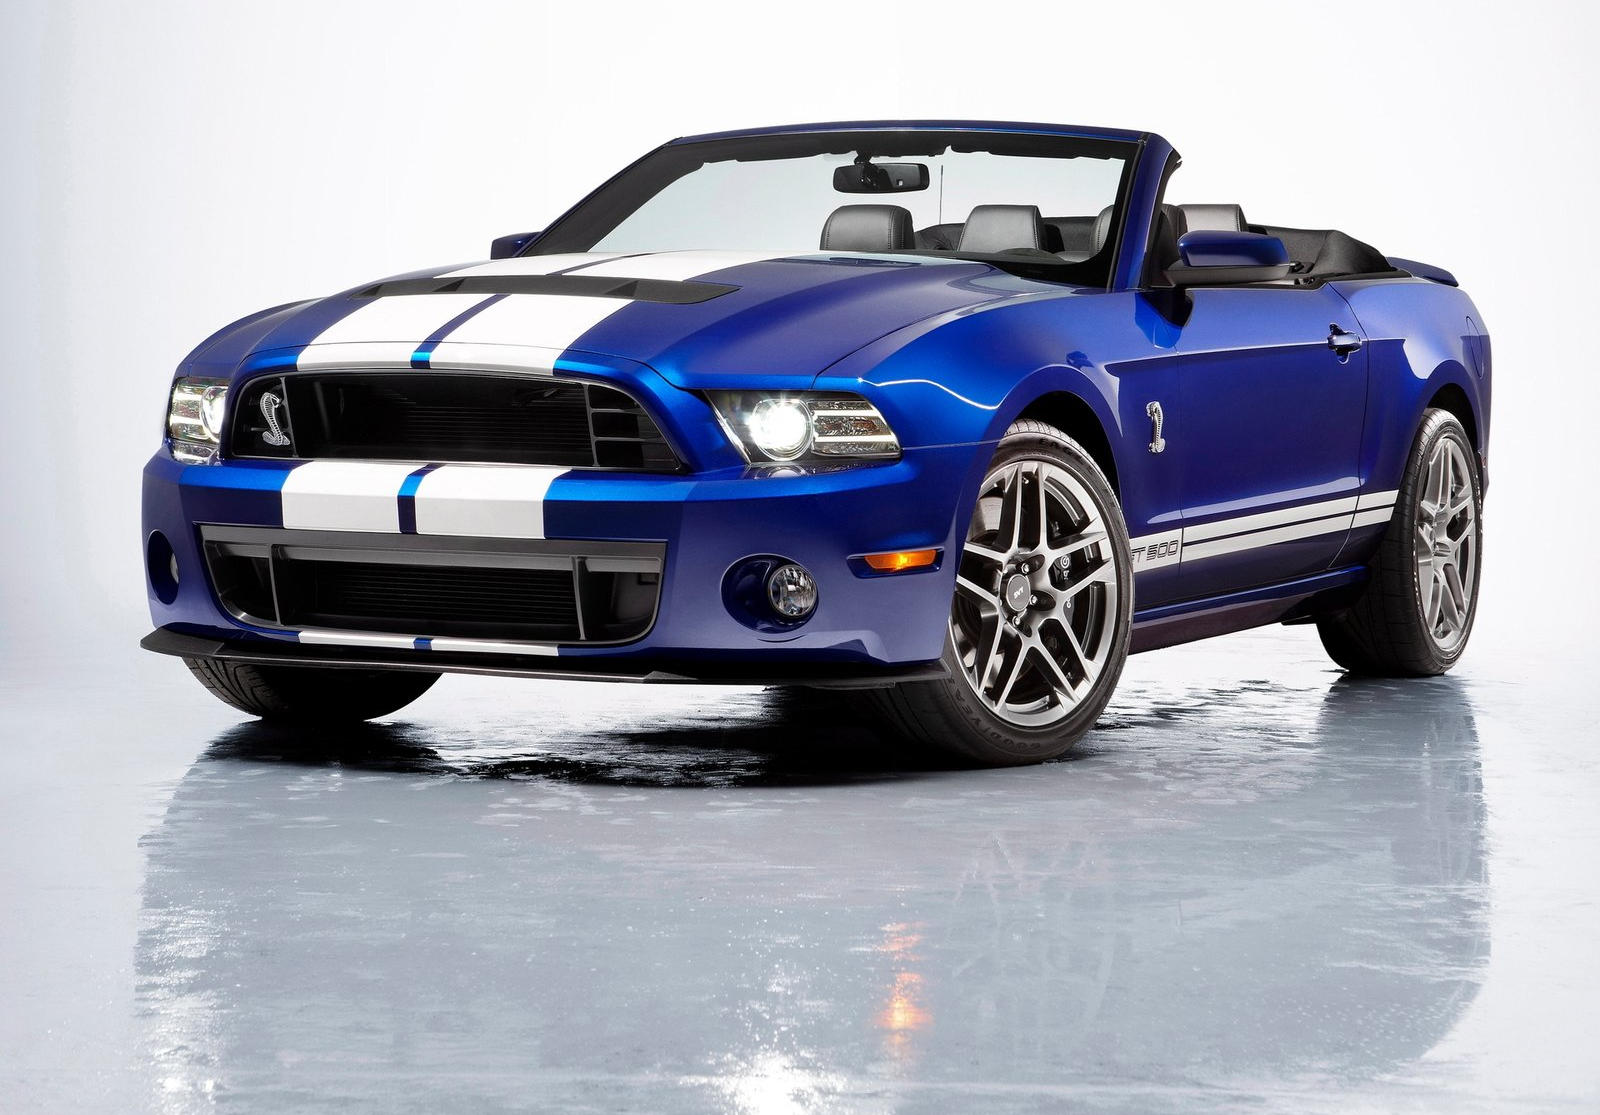 Used Ford Mustang Shelby Gt500 Convertible Check Mustang Shelby Gt500